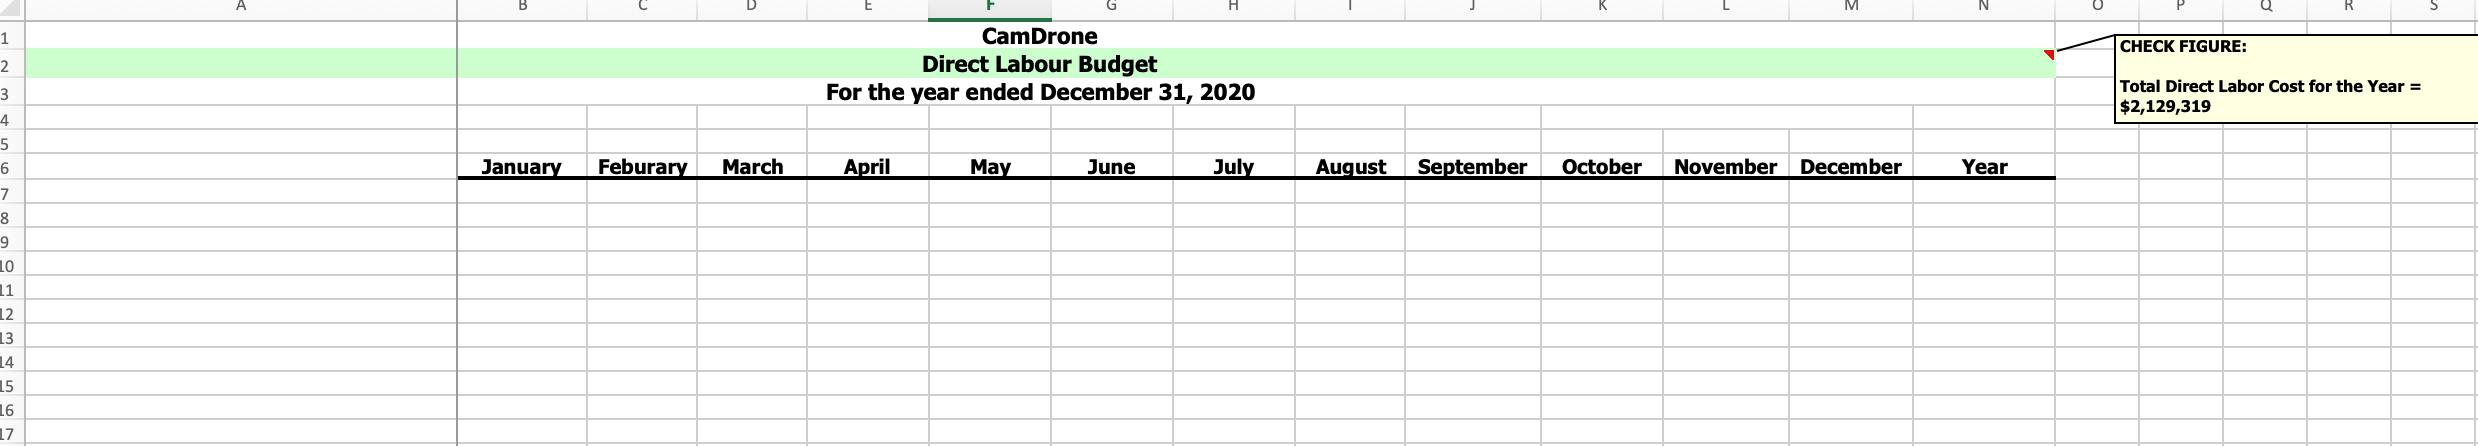 E HM 12 CHECK FIGURE: Cam Drone Direct Labour Budget For the year ended December 31, 2020 Total Direct Labor Cost for the Y